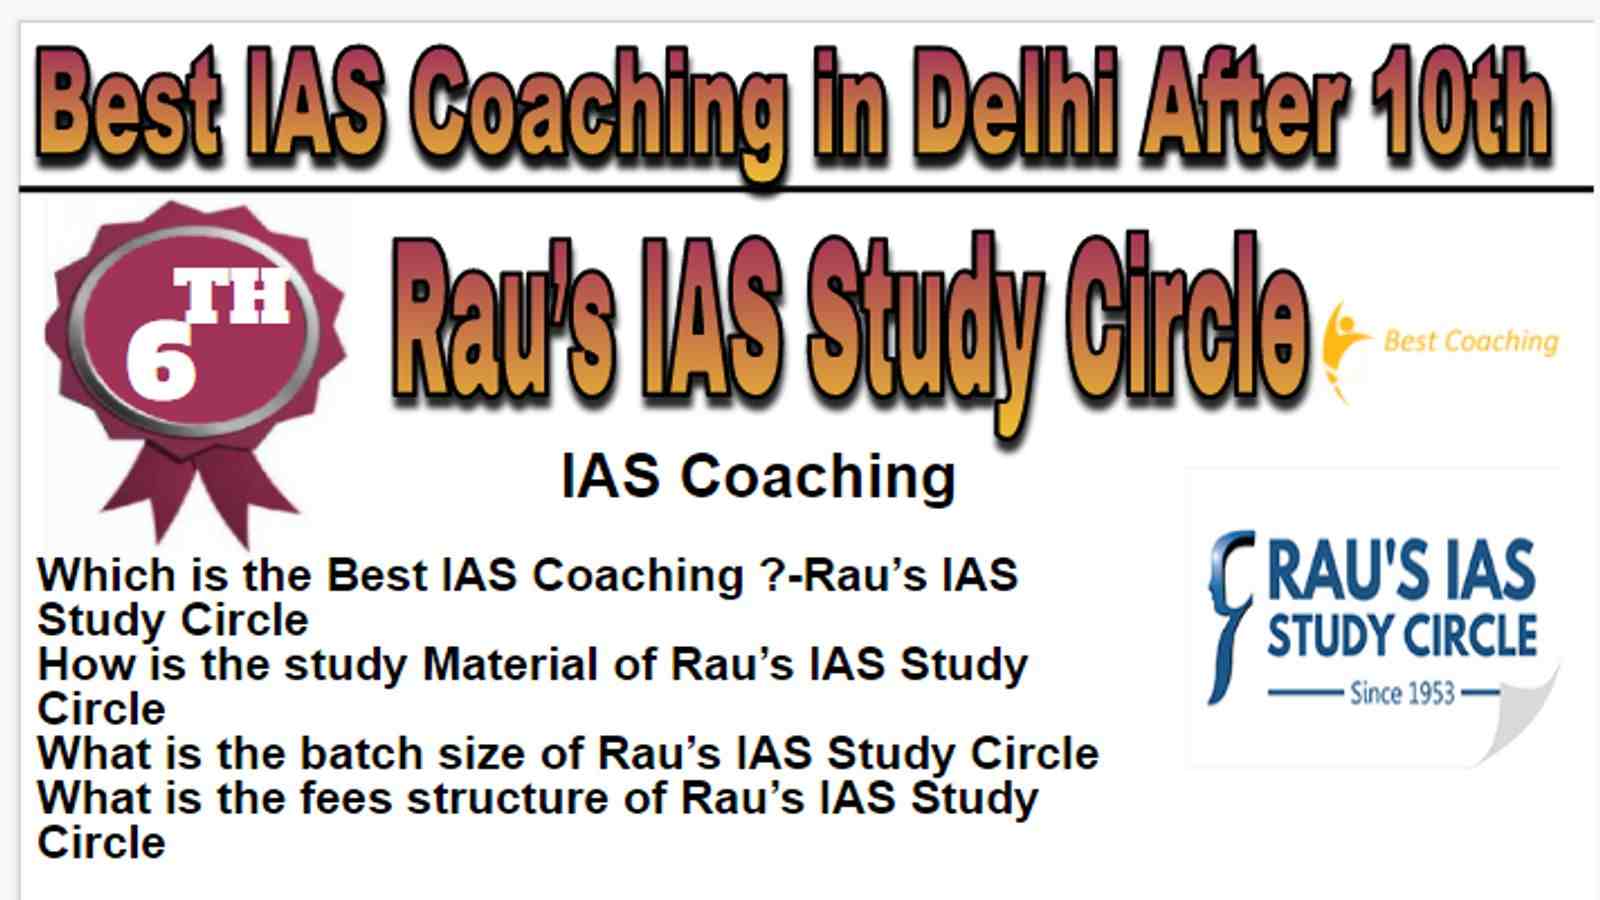 Rank 6 Best IAS coaching in Delhi after 10th